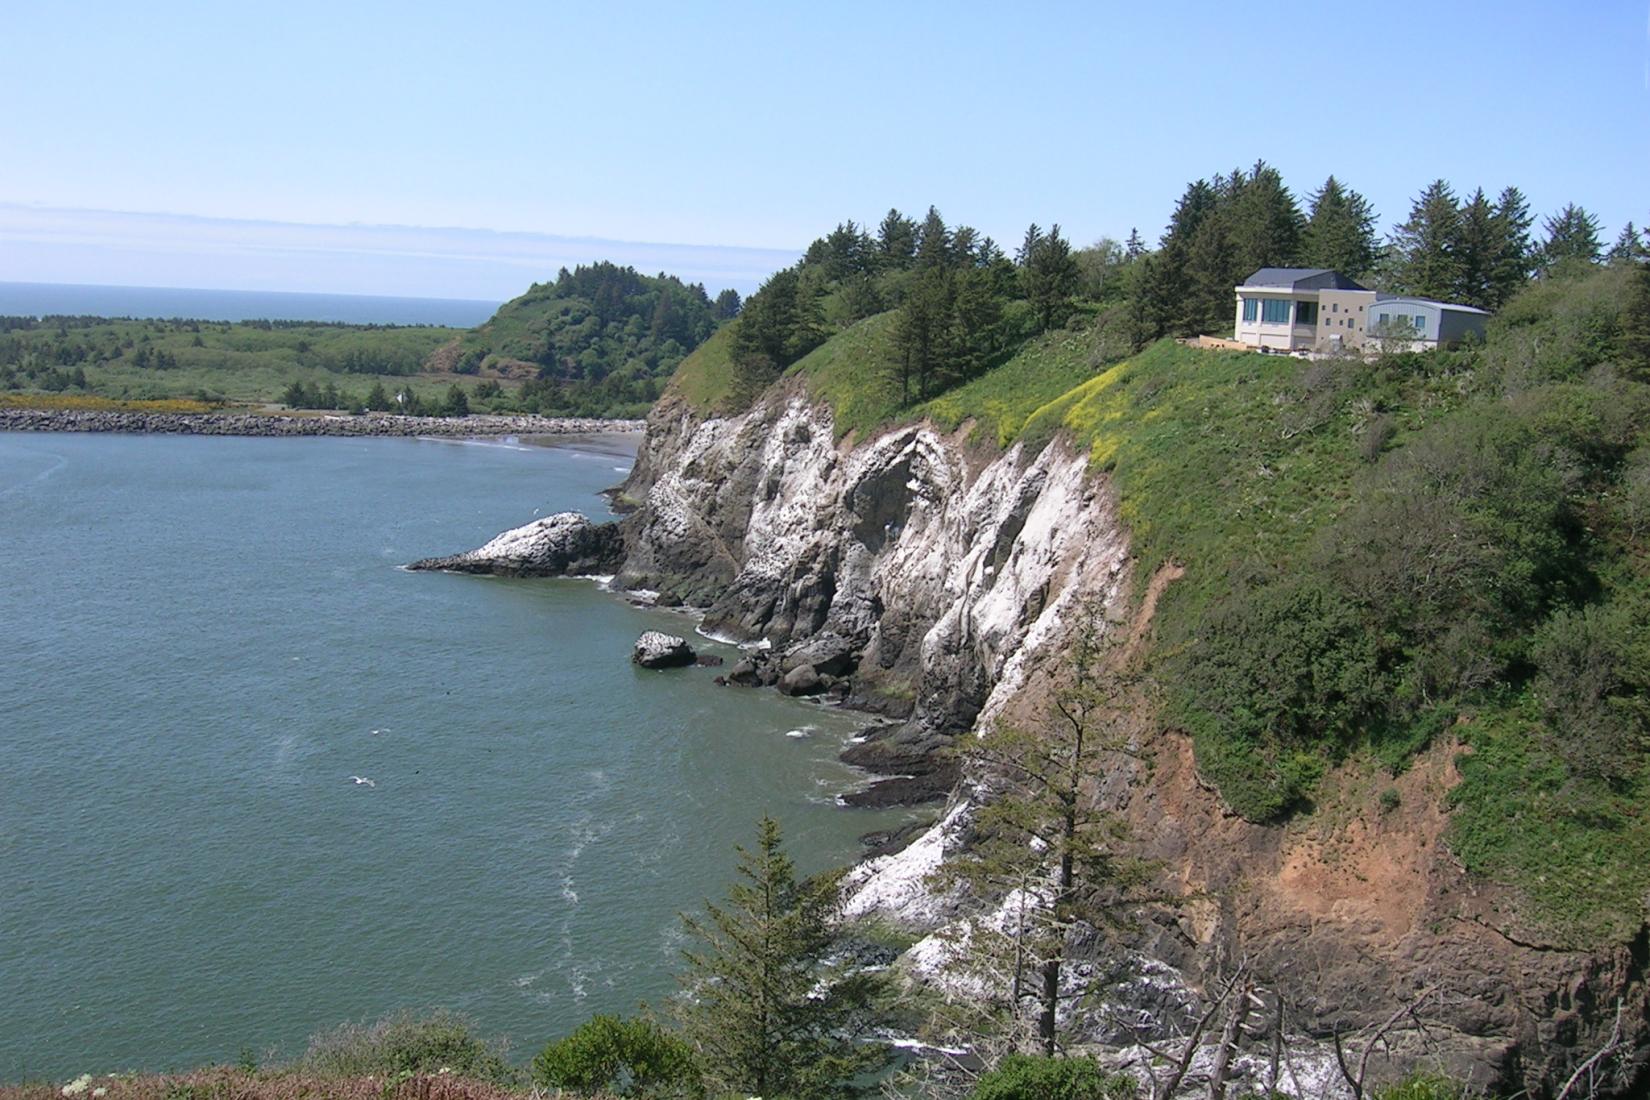 Sandee - Cape Disappointment Coast Guard Station